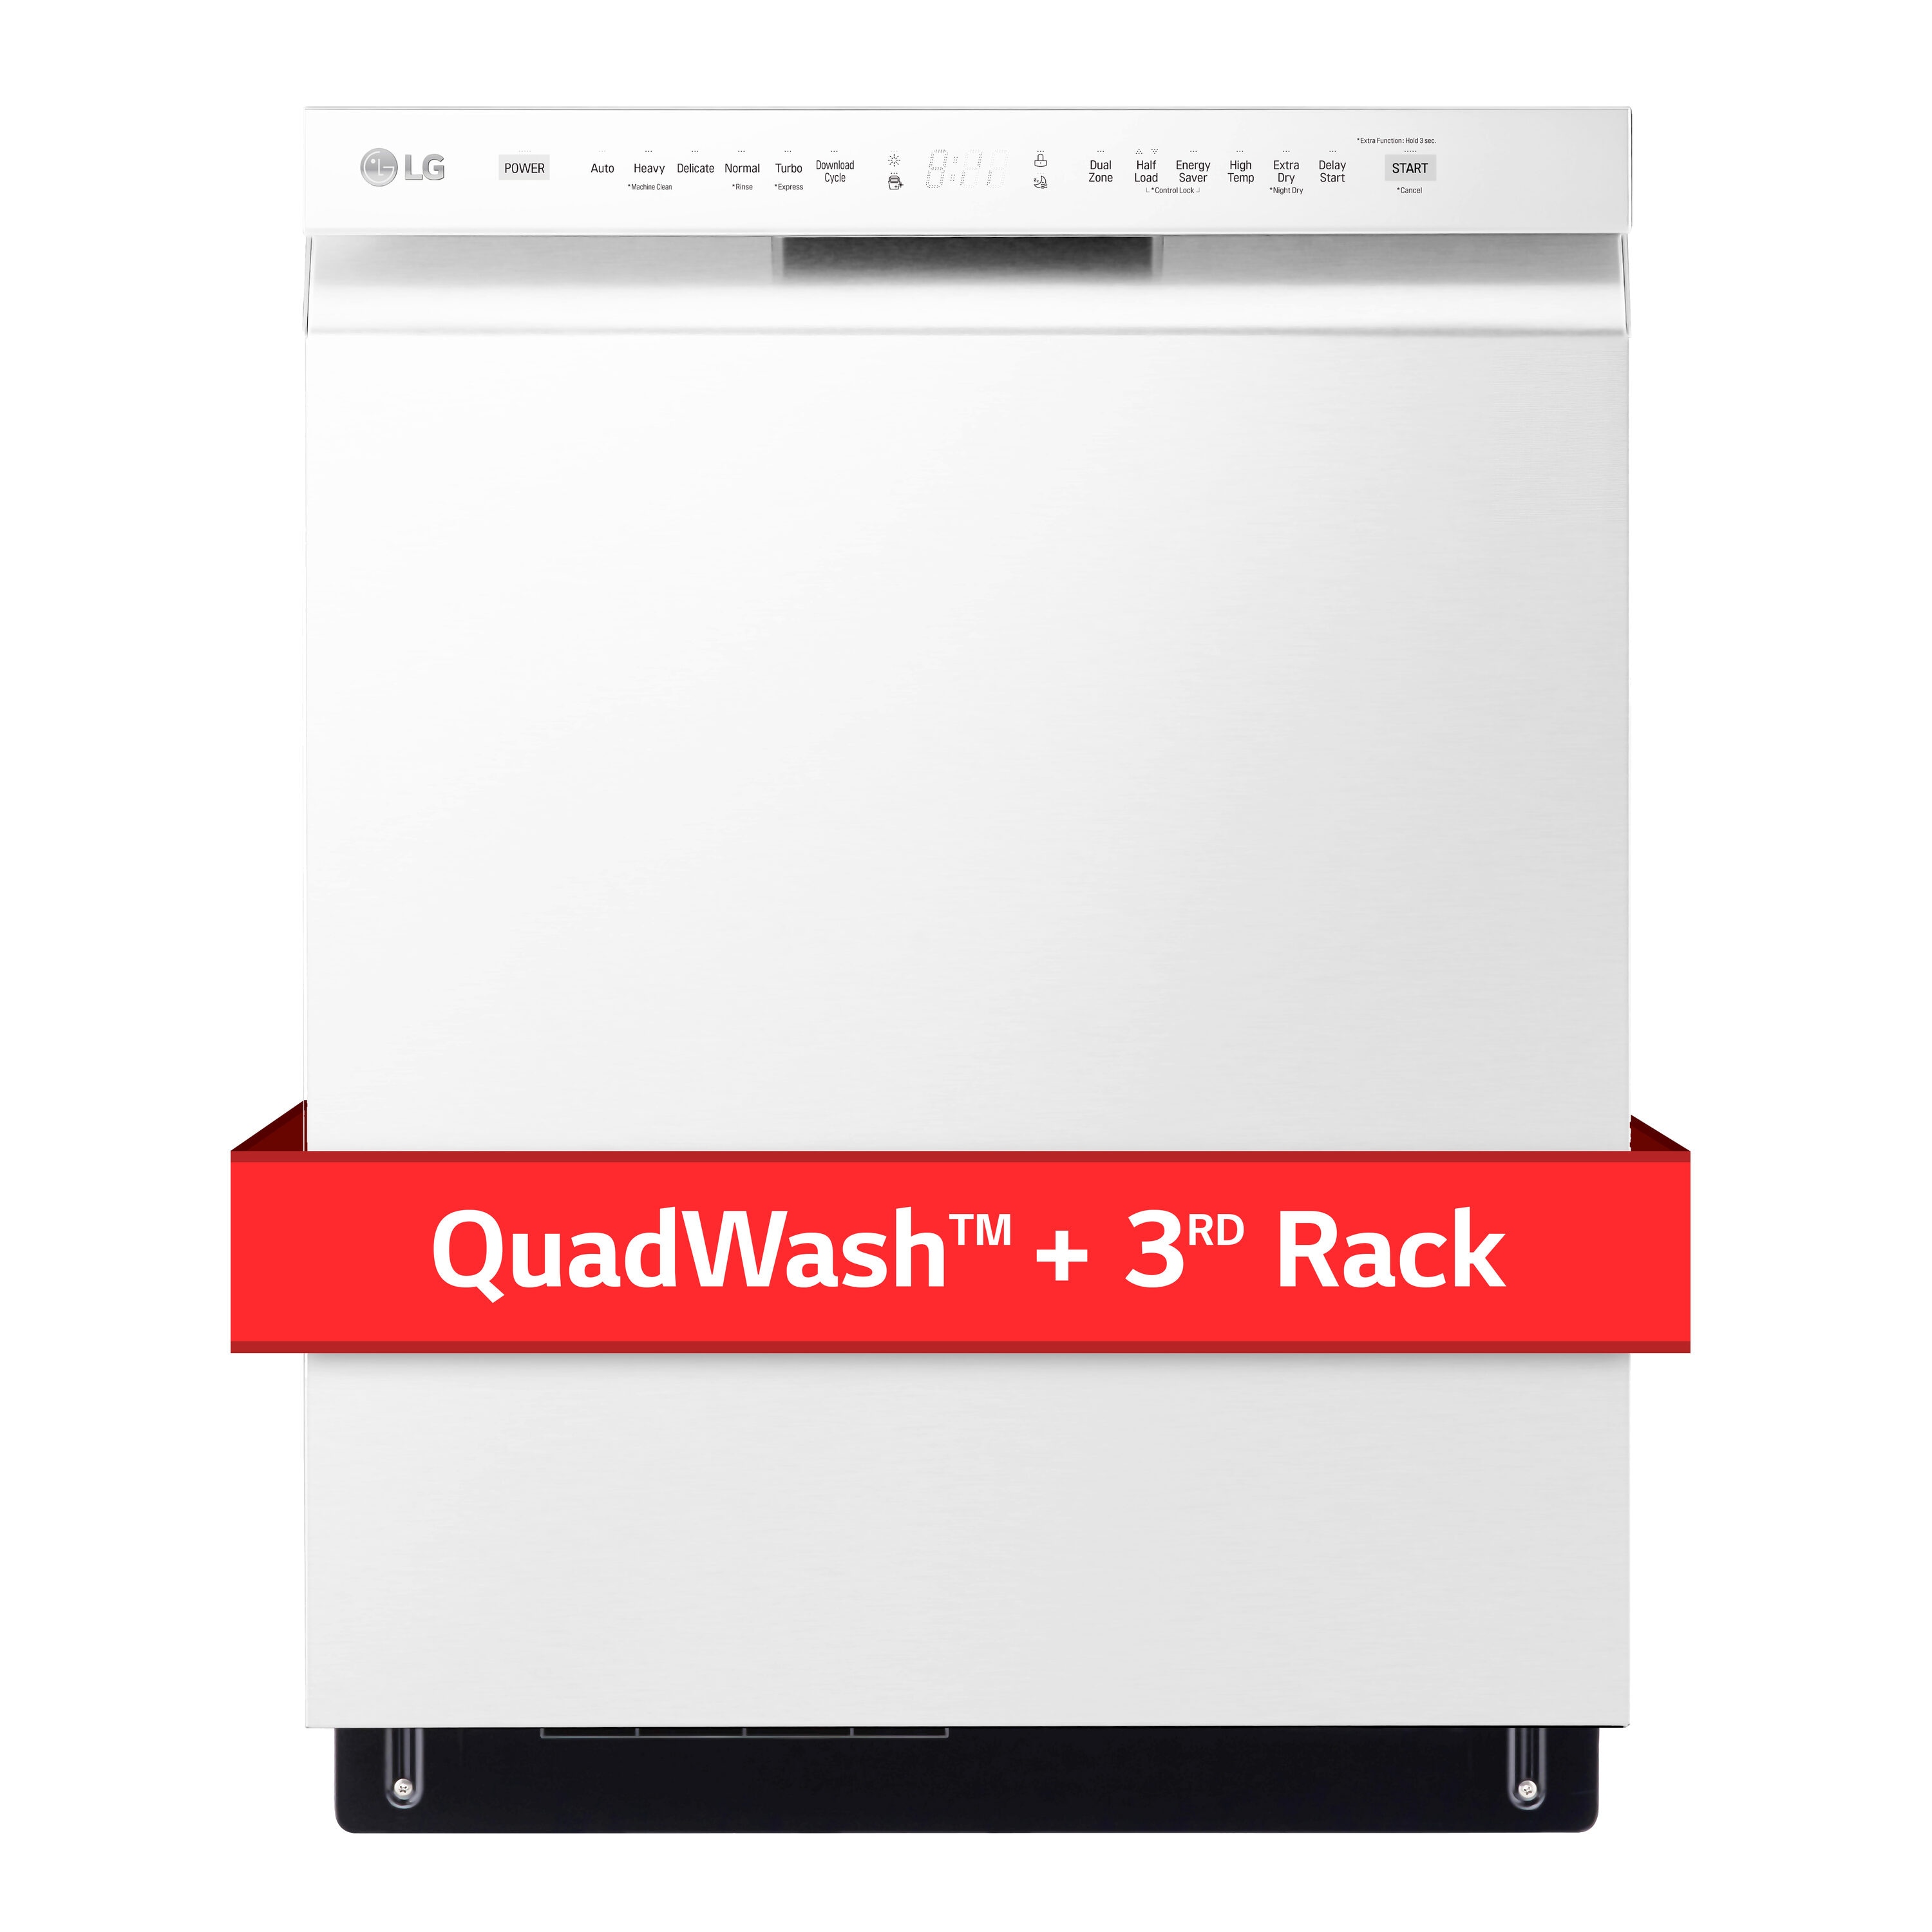 How to Fix Your LG Dishwasher Not Starting